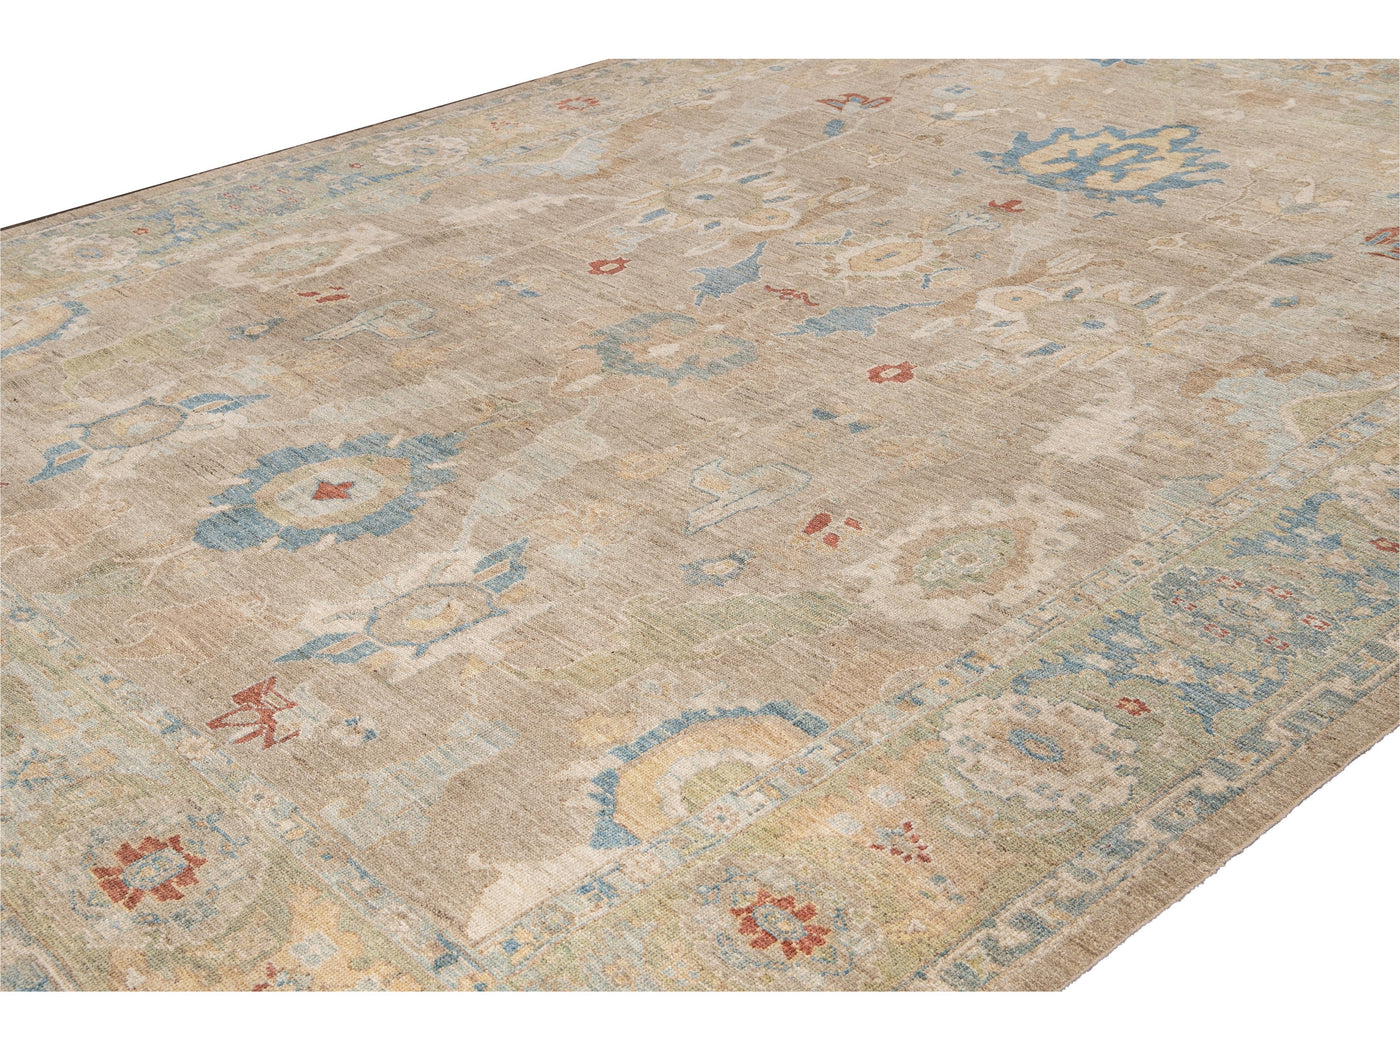 Modern Sultanabad Handmade Beige and Green Floral Wool Rug